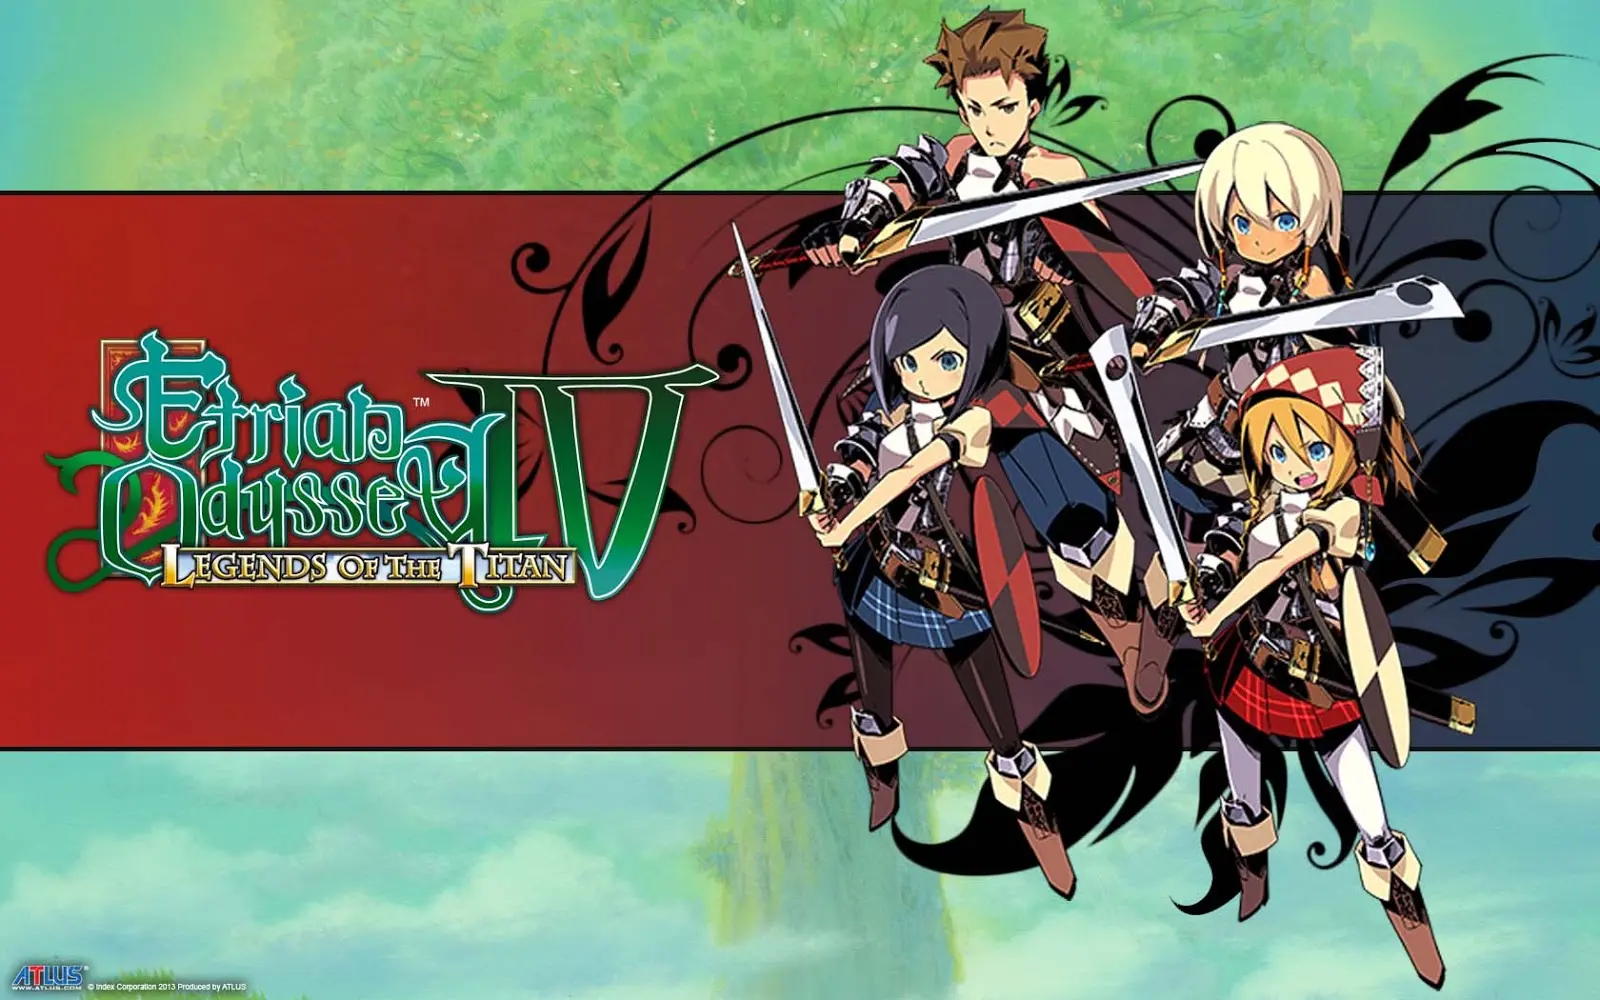 Game Etrian Odyssey IV Legends of the Titan wallpaper 2 | Background Image